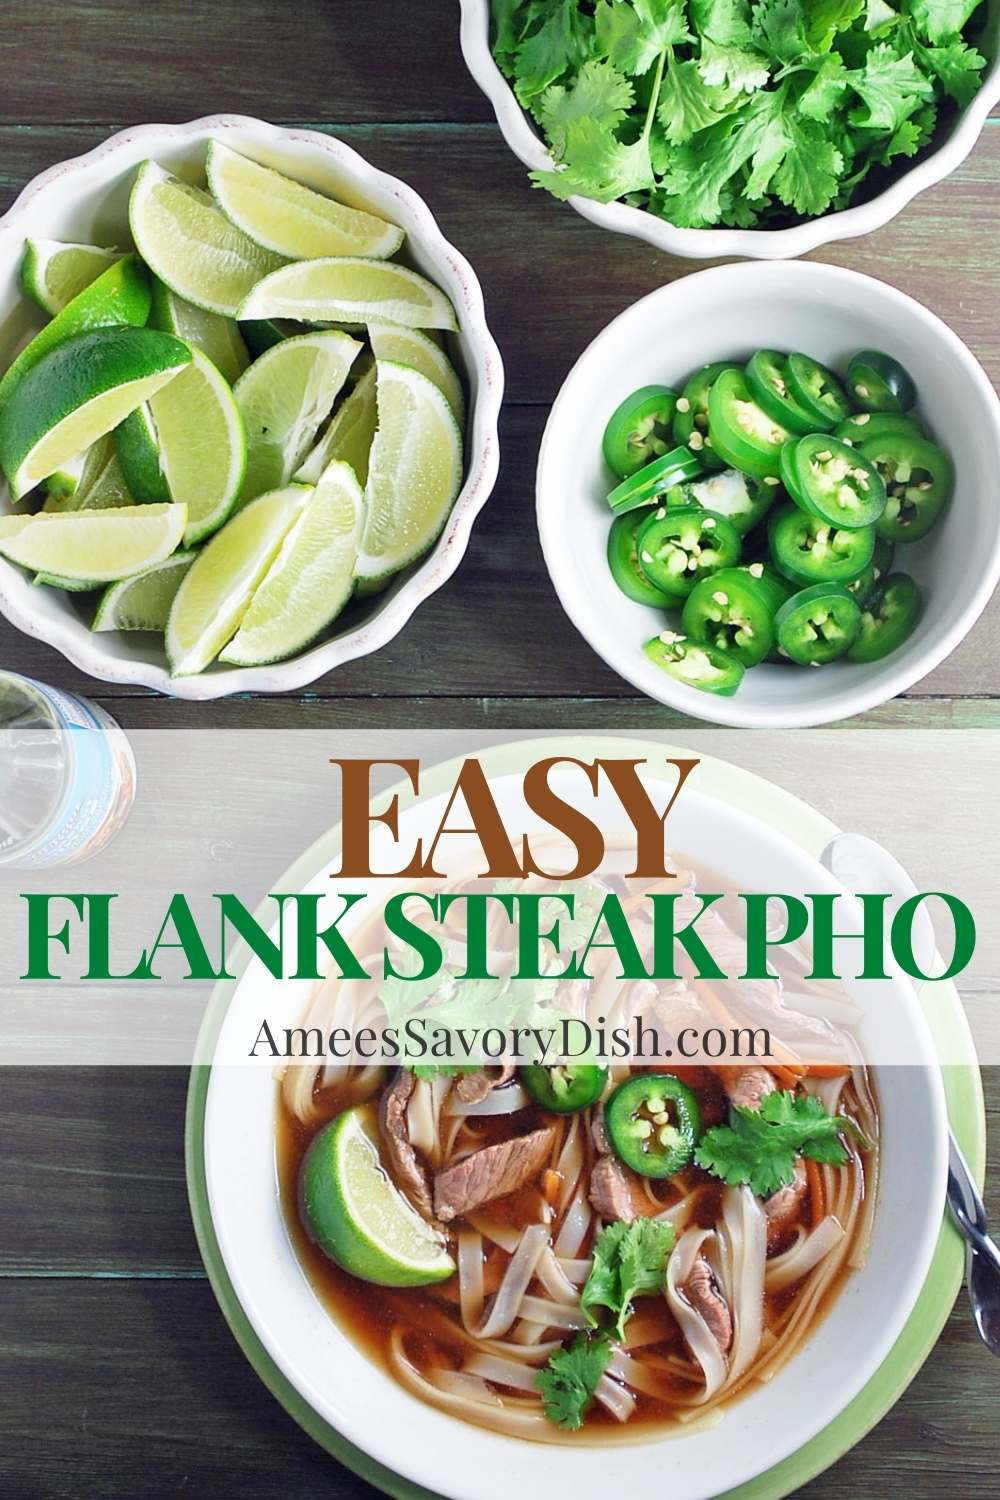 Make your own DIY beef pho bowls with a simple and delicious flank steak pho recipe!  Tender flank steak is the star of this nutritious one-dish meal. via @Ameessavorydish